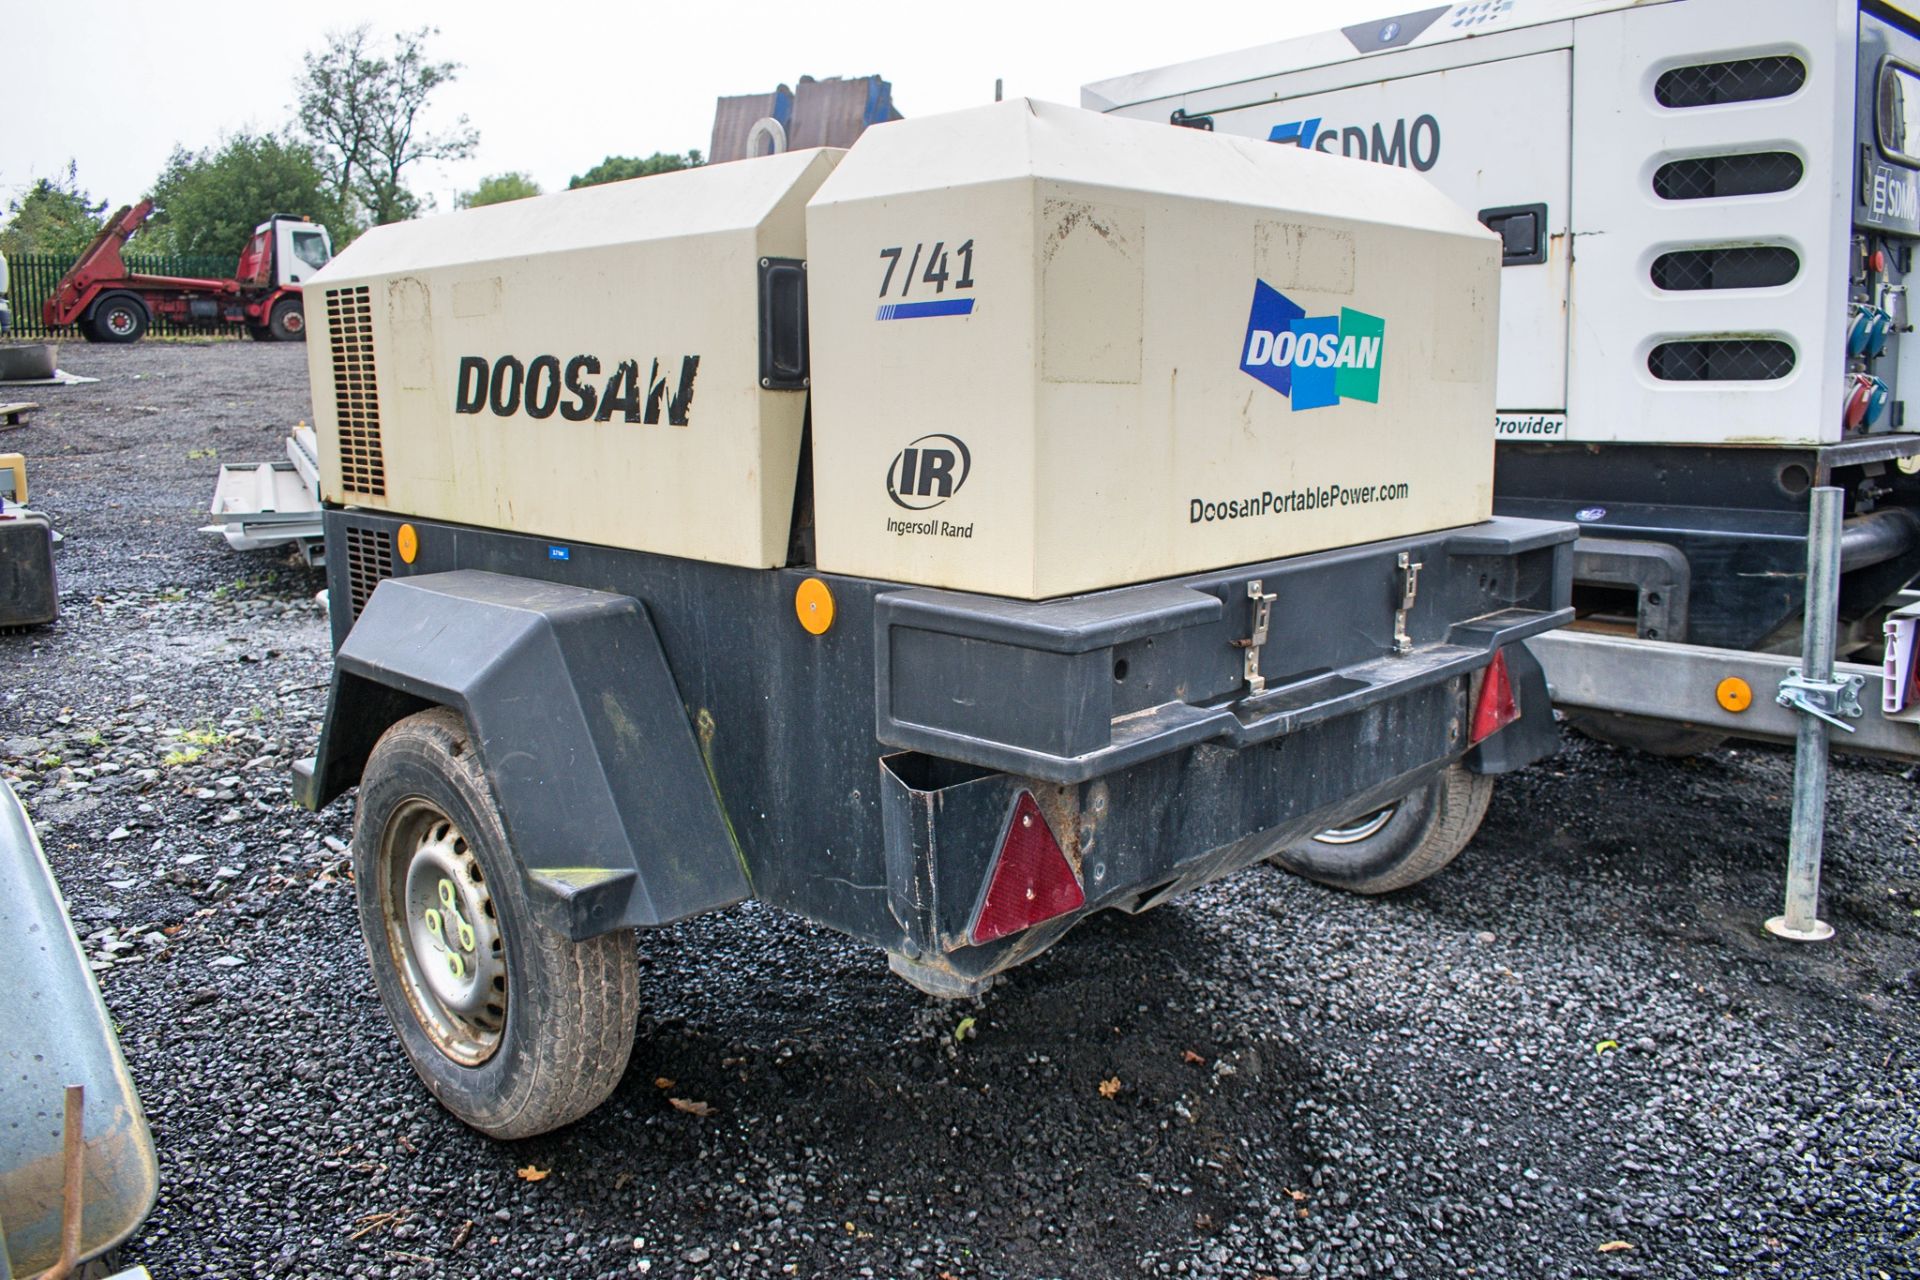 Ingersoll Rand 741 diesel driven mobile air compressor Year: 2012 S/N: 431491 Recorded Hours: 821 - Image 2 of 4